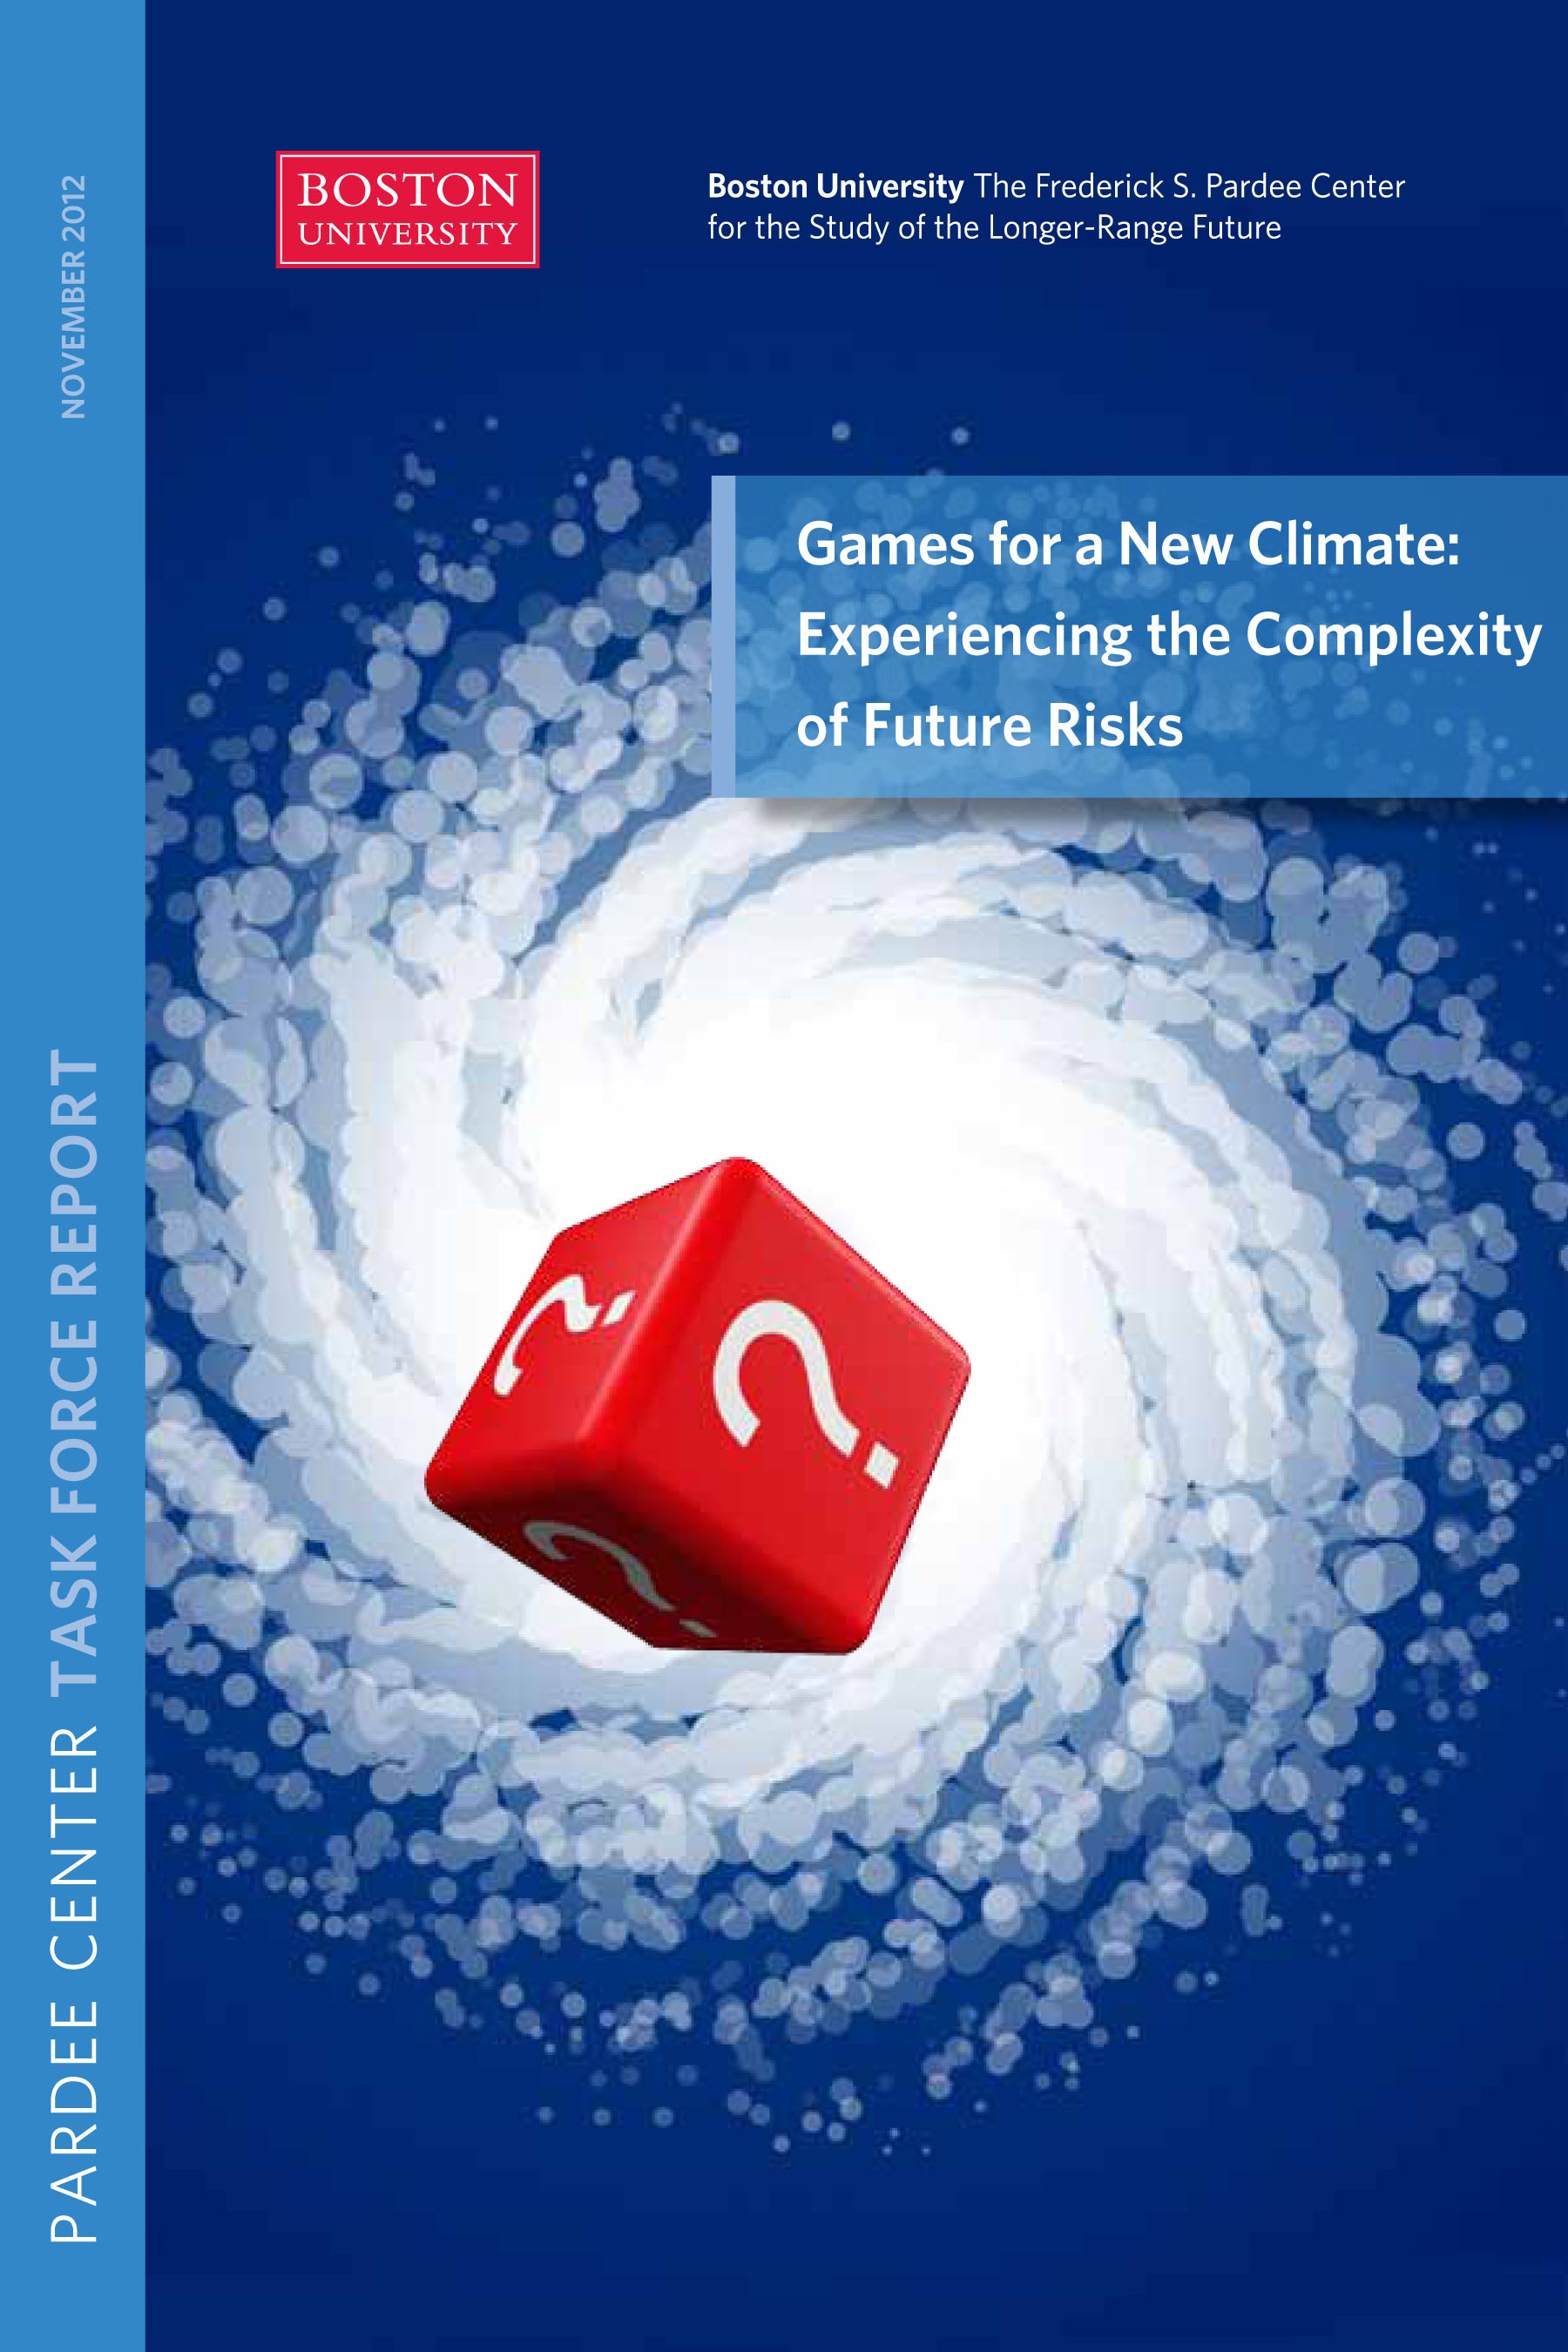 Games for a New Climate TF Official-1